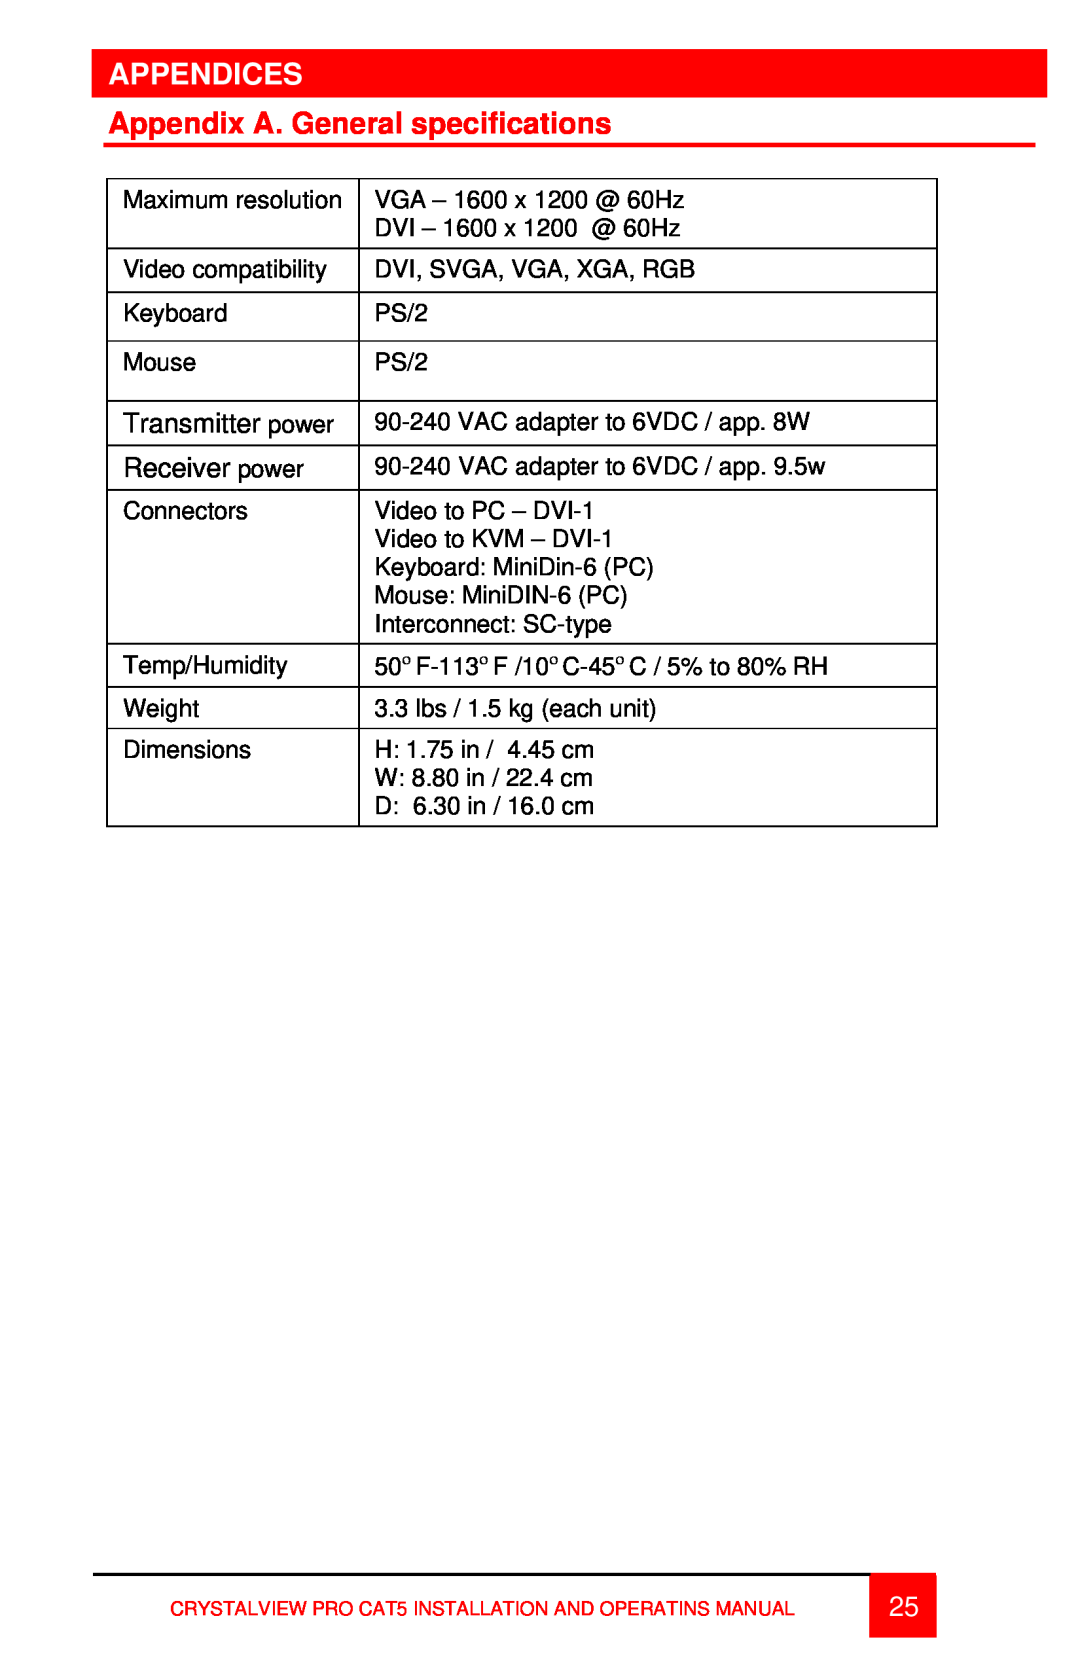 Rose electronic CAT5 manual Appendices, Appendix A. General specifications 